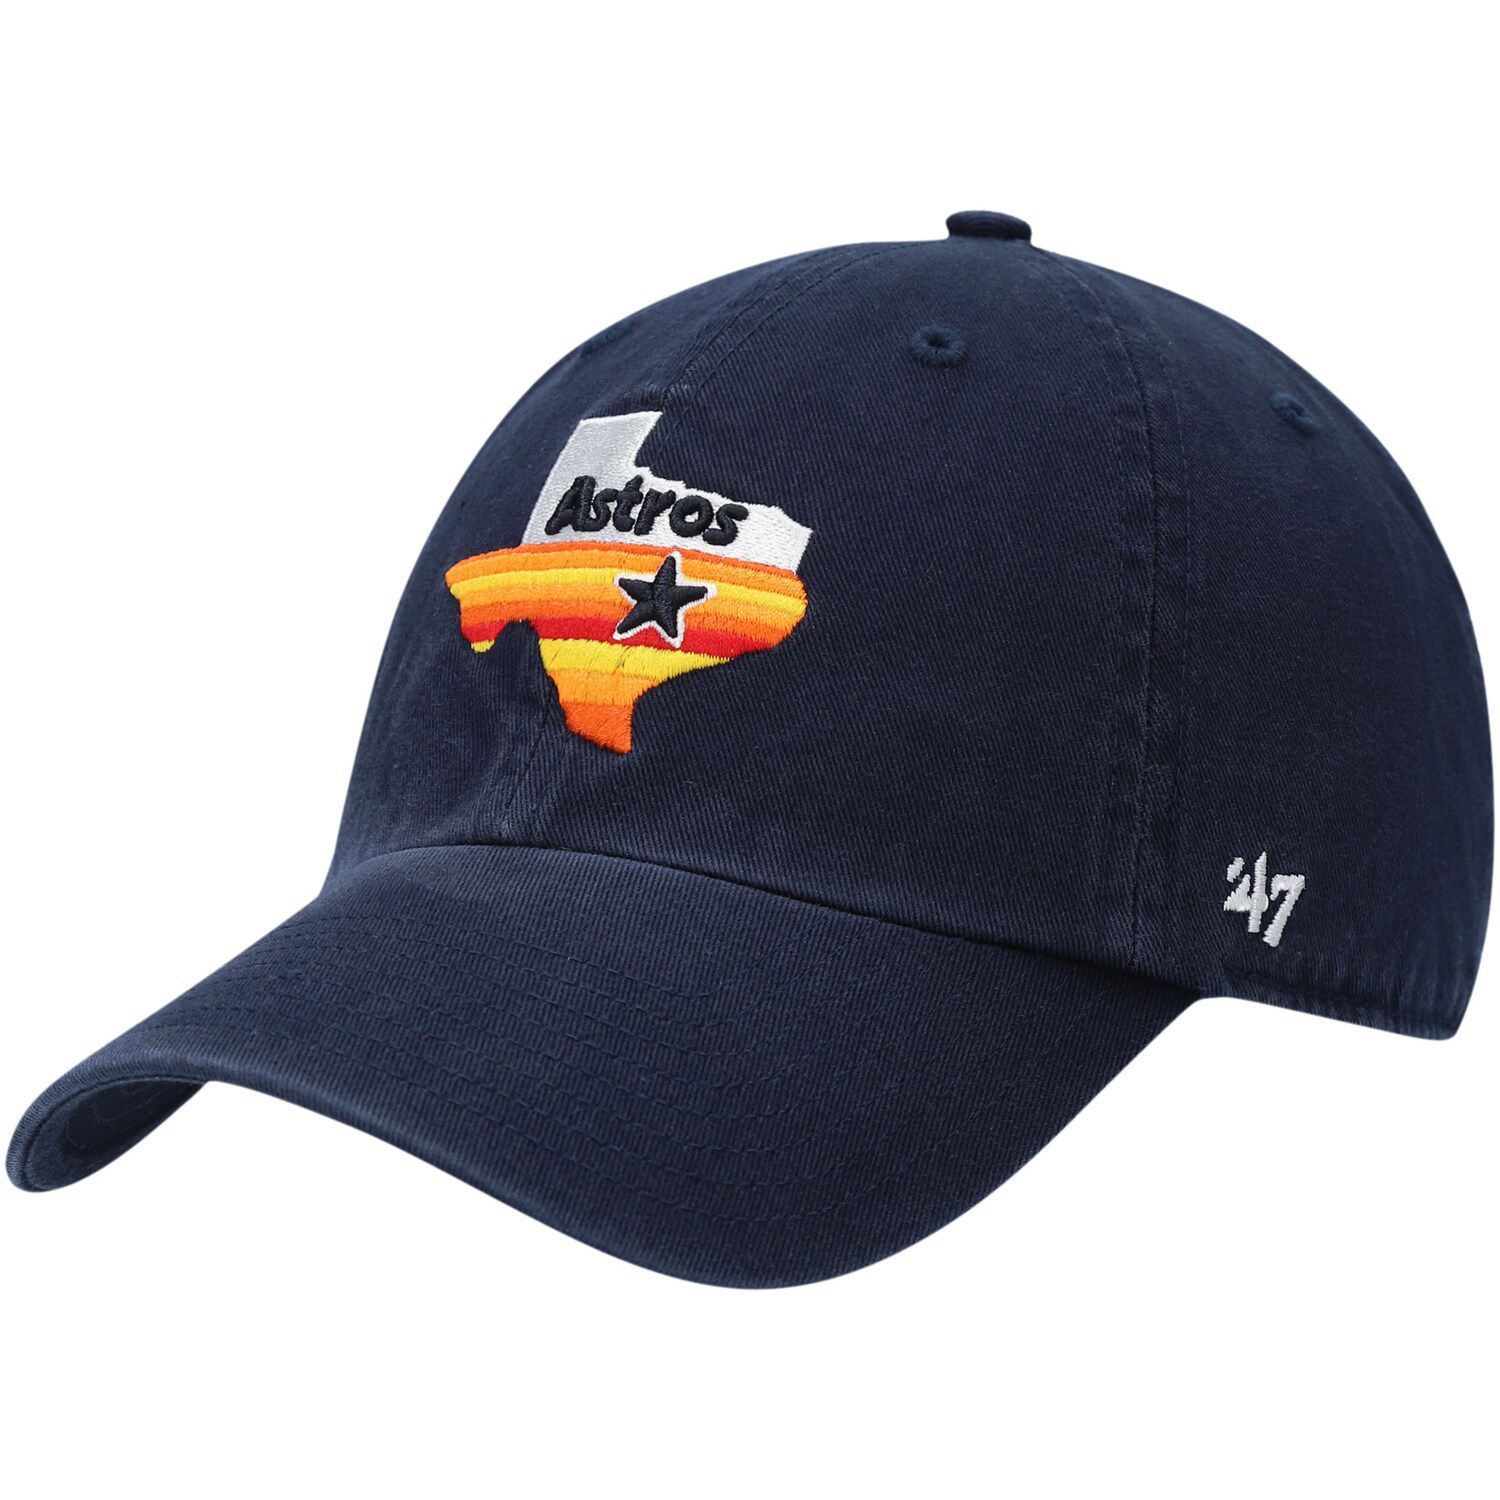 Houston Astros New Era Vice Highlighter 59FIFTY Fitted Hat - Blue